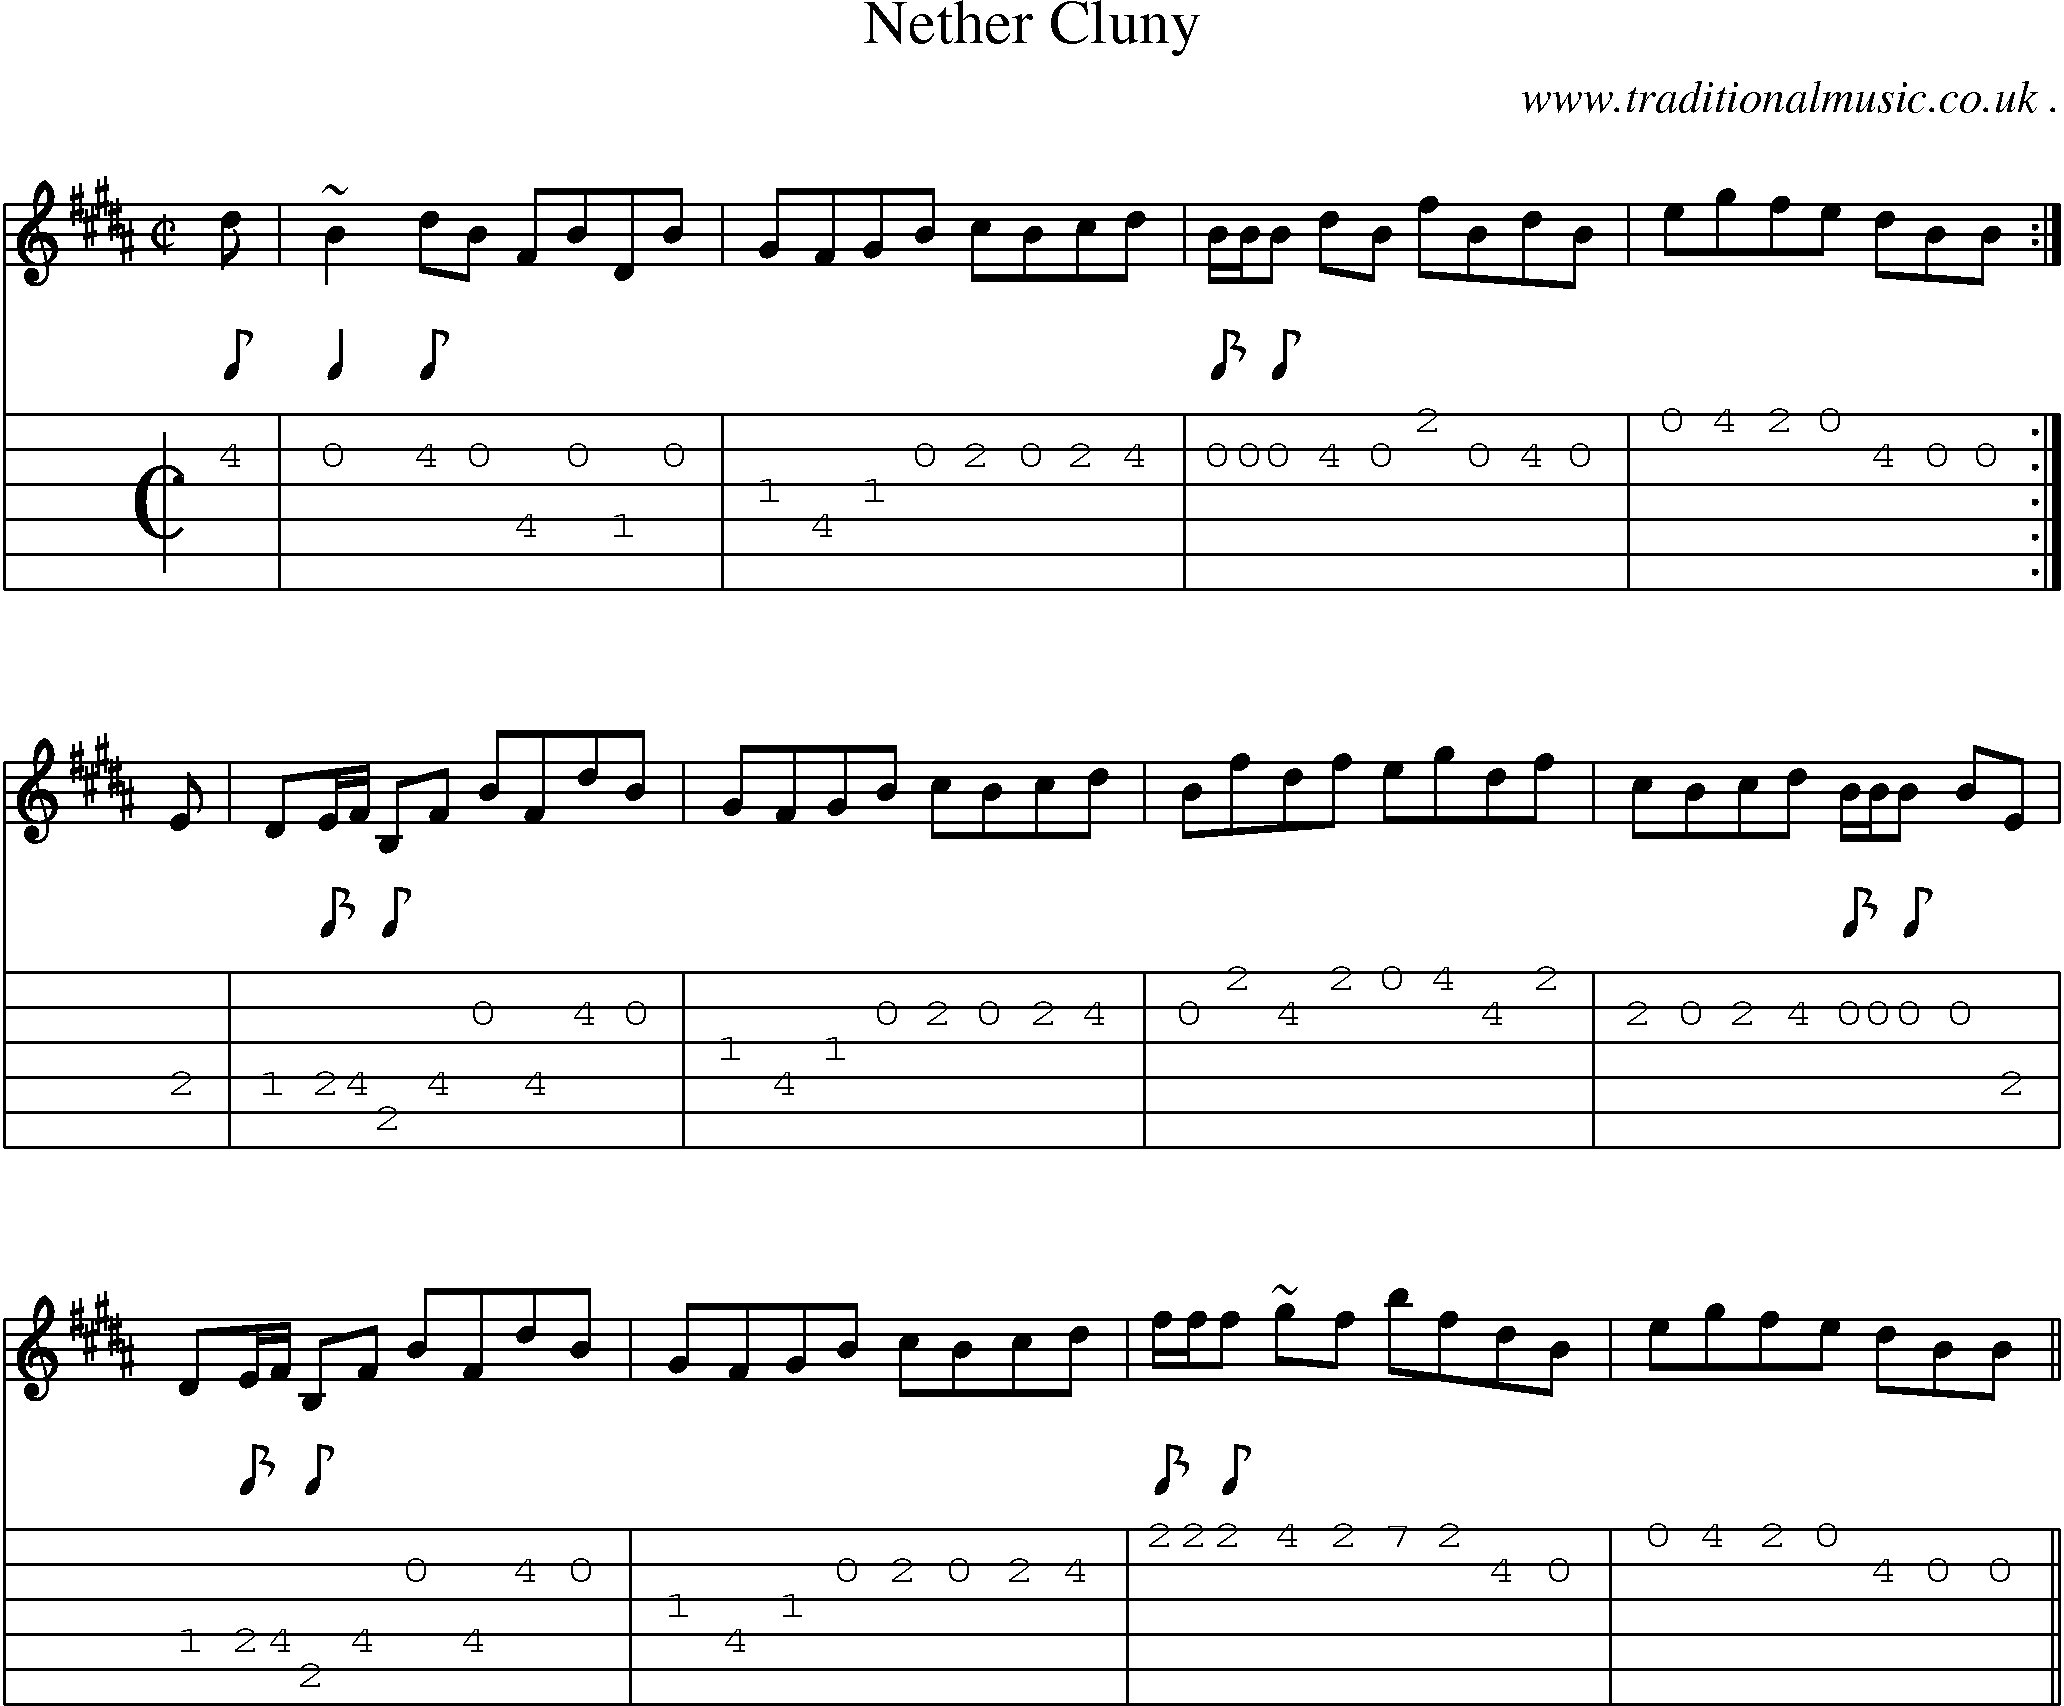 Sheet-music  score, Chords and Guitar Tabs for Nether Cluny